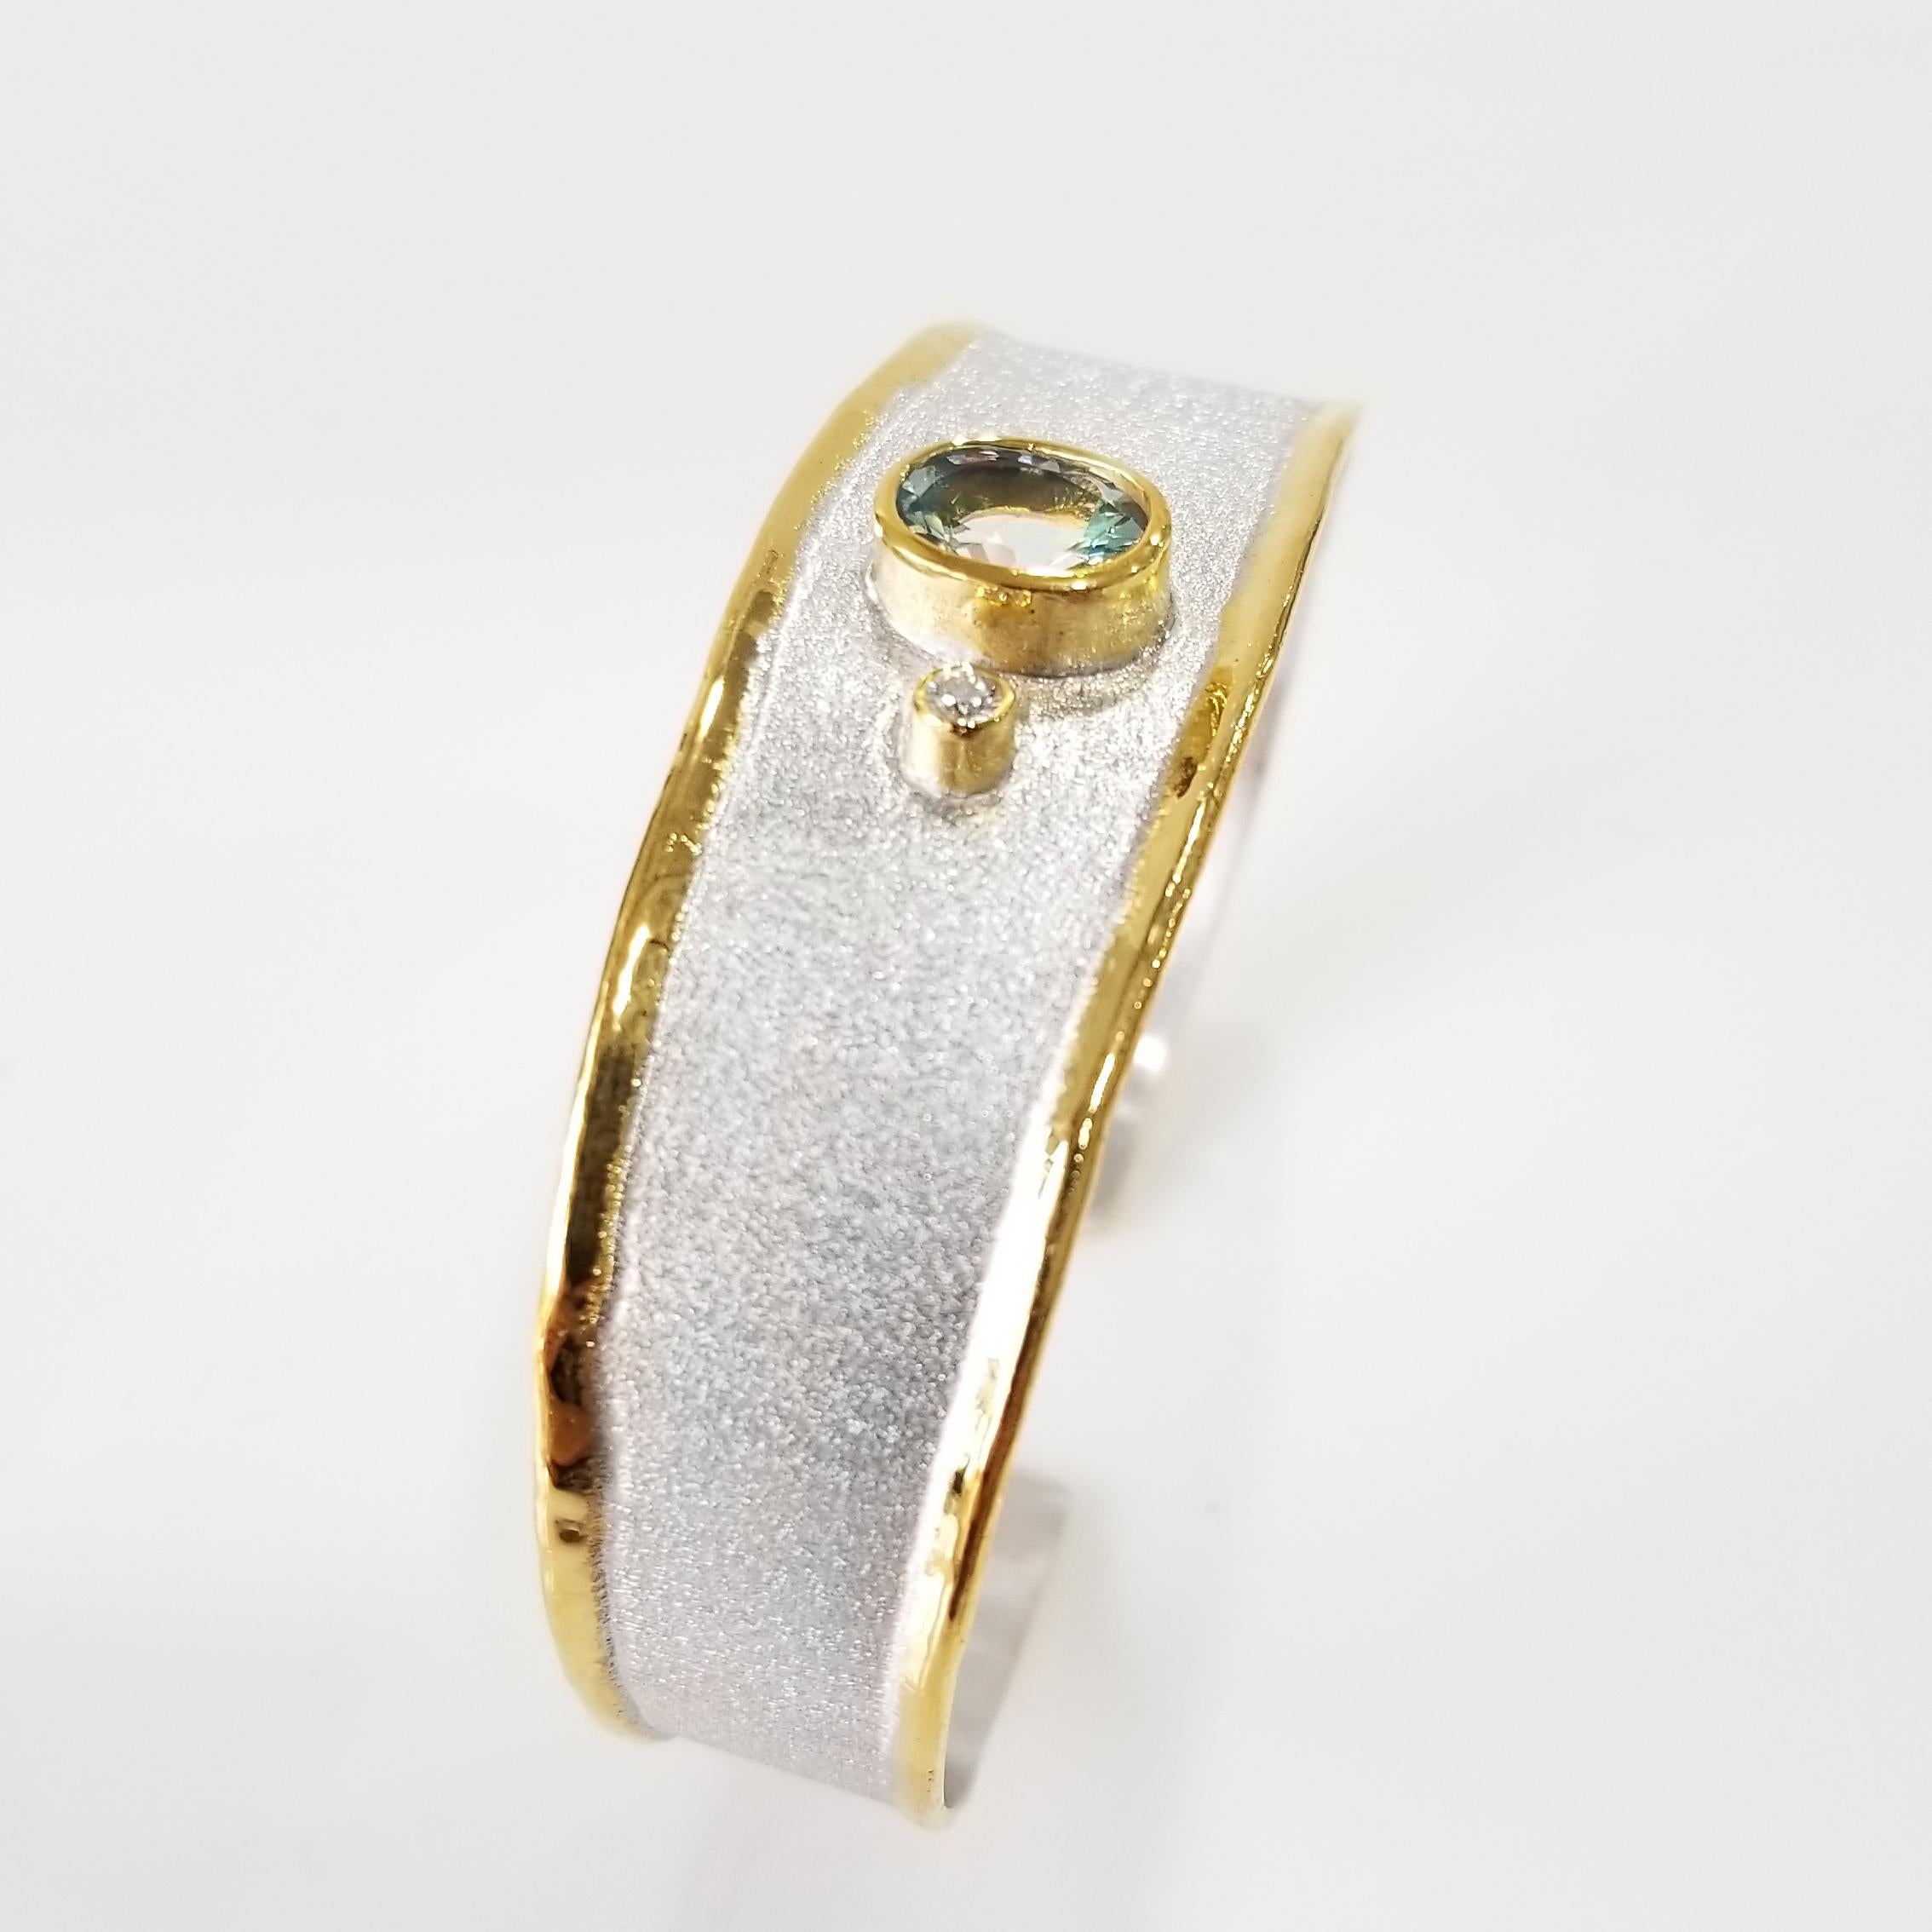 Yianni Creations cuff bracelet from Midas Collection all handcrafted from fine silver 950 purity and plated with palladium to resist the elements. This gorgeous artisan cuff bracelet features a 1.80 Carat oval shape natural Aquamarine accompanied by